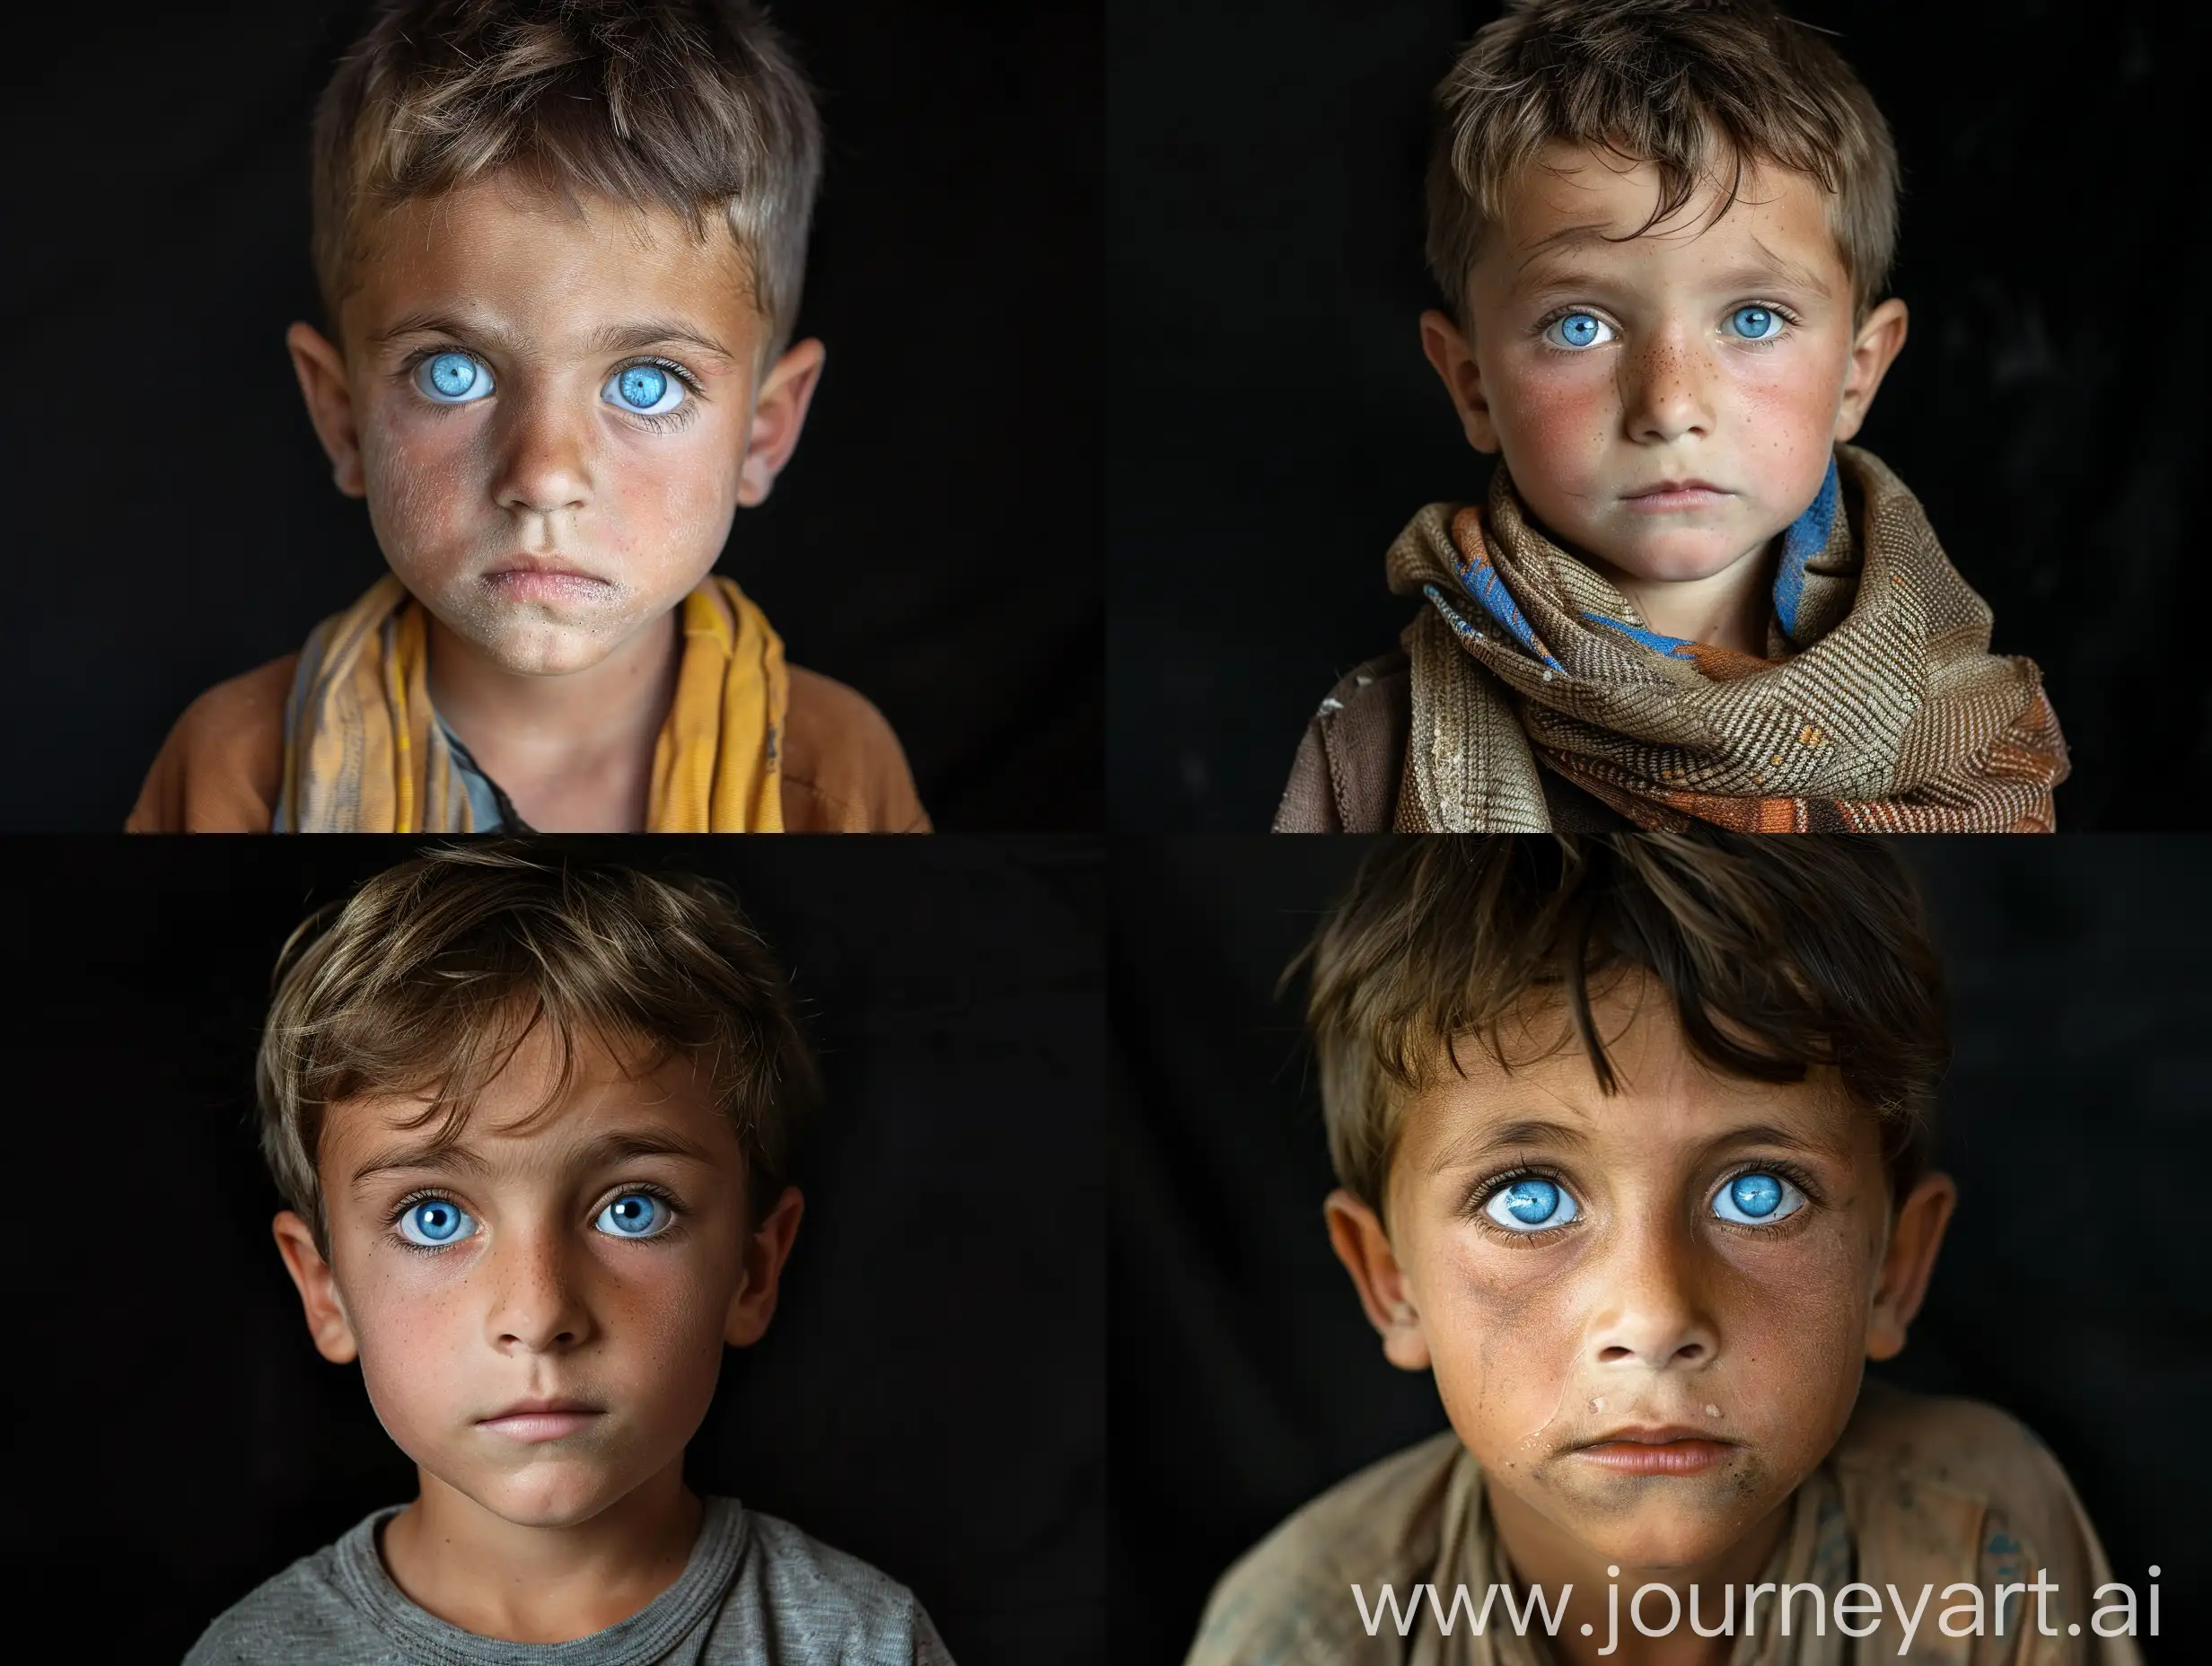 Portrait-of-Poor-Kid-with-Blue-Eyes-on-Black-Background